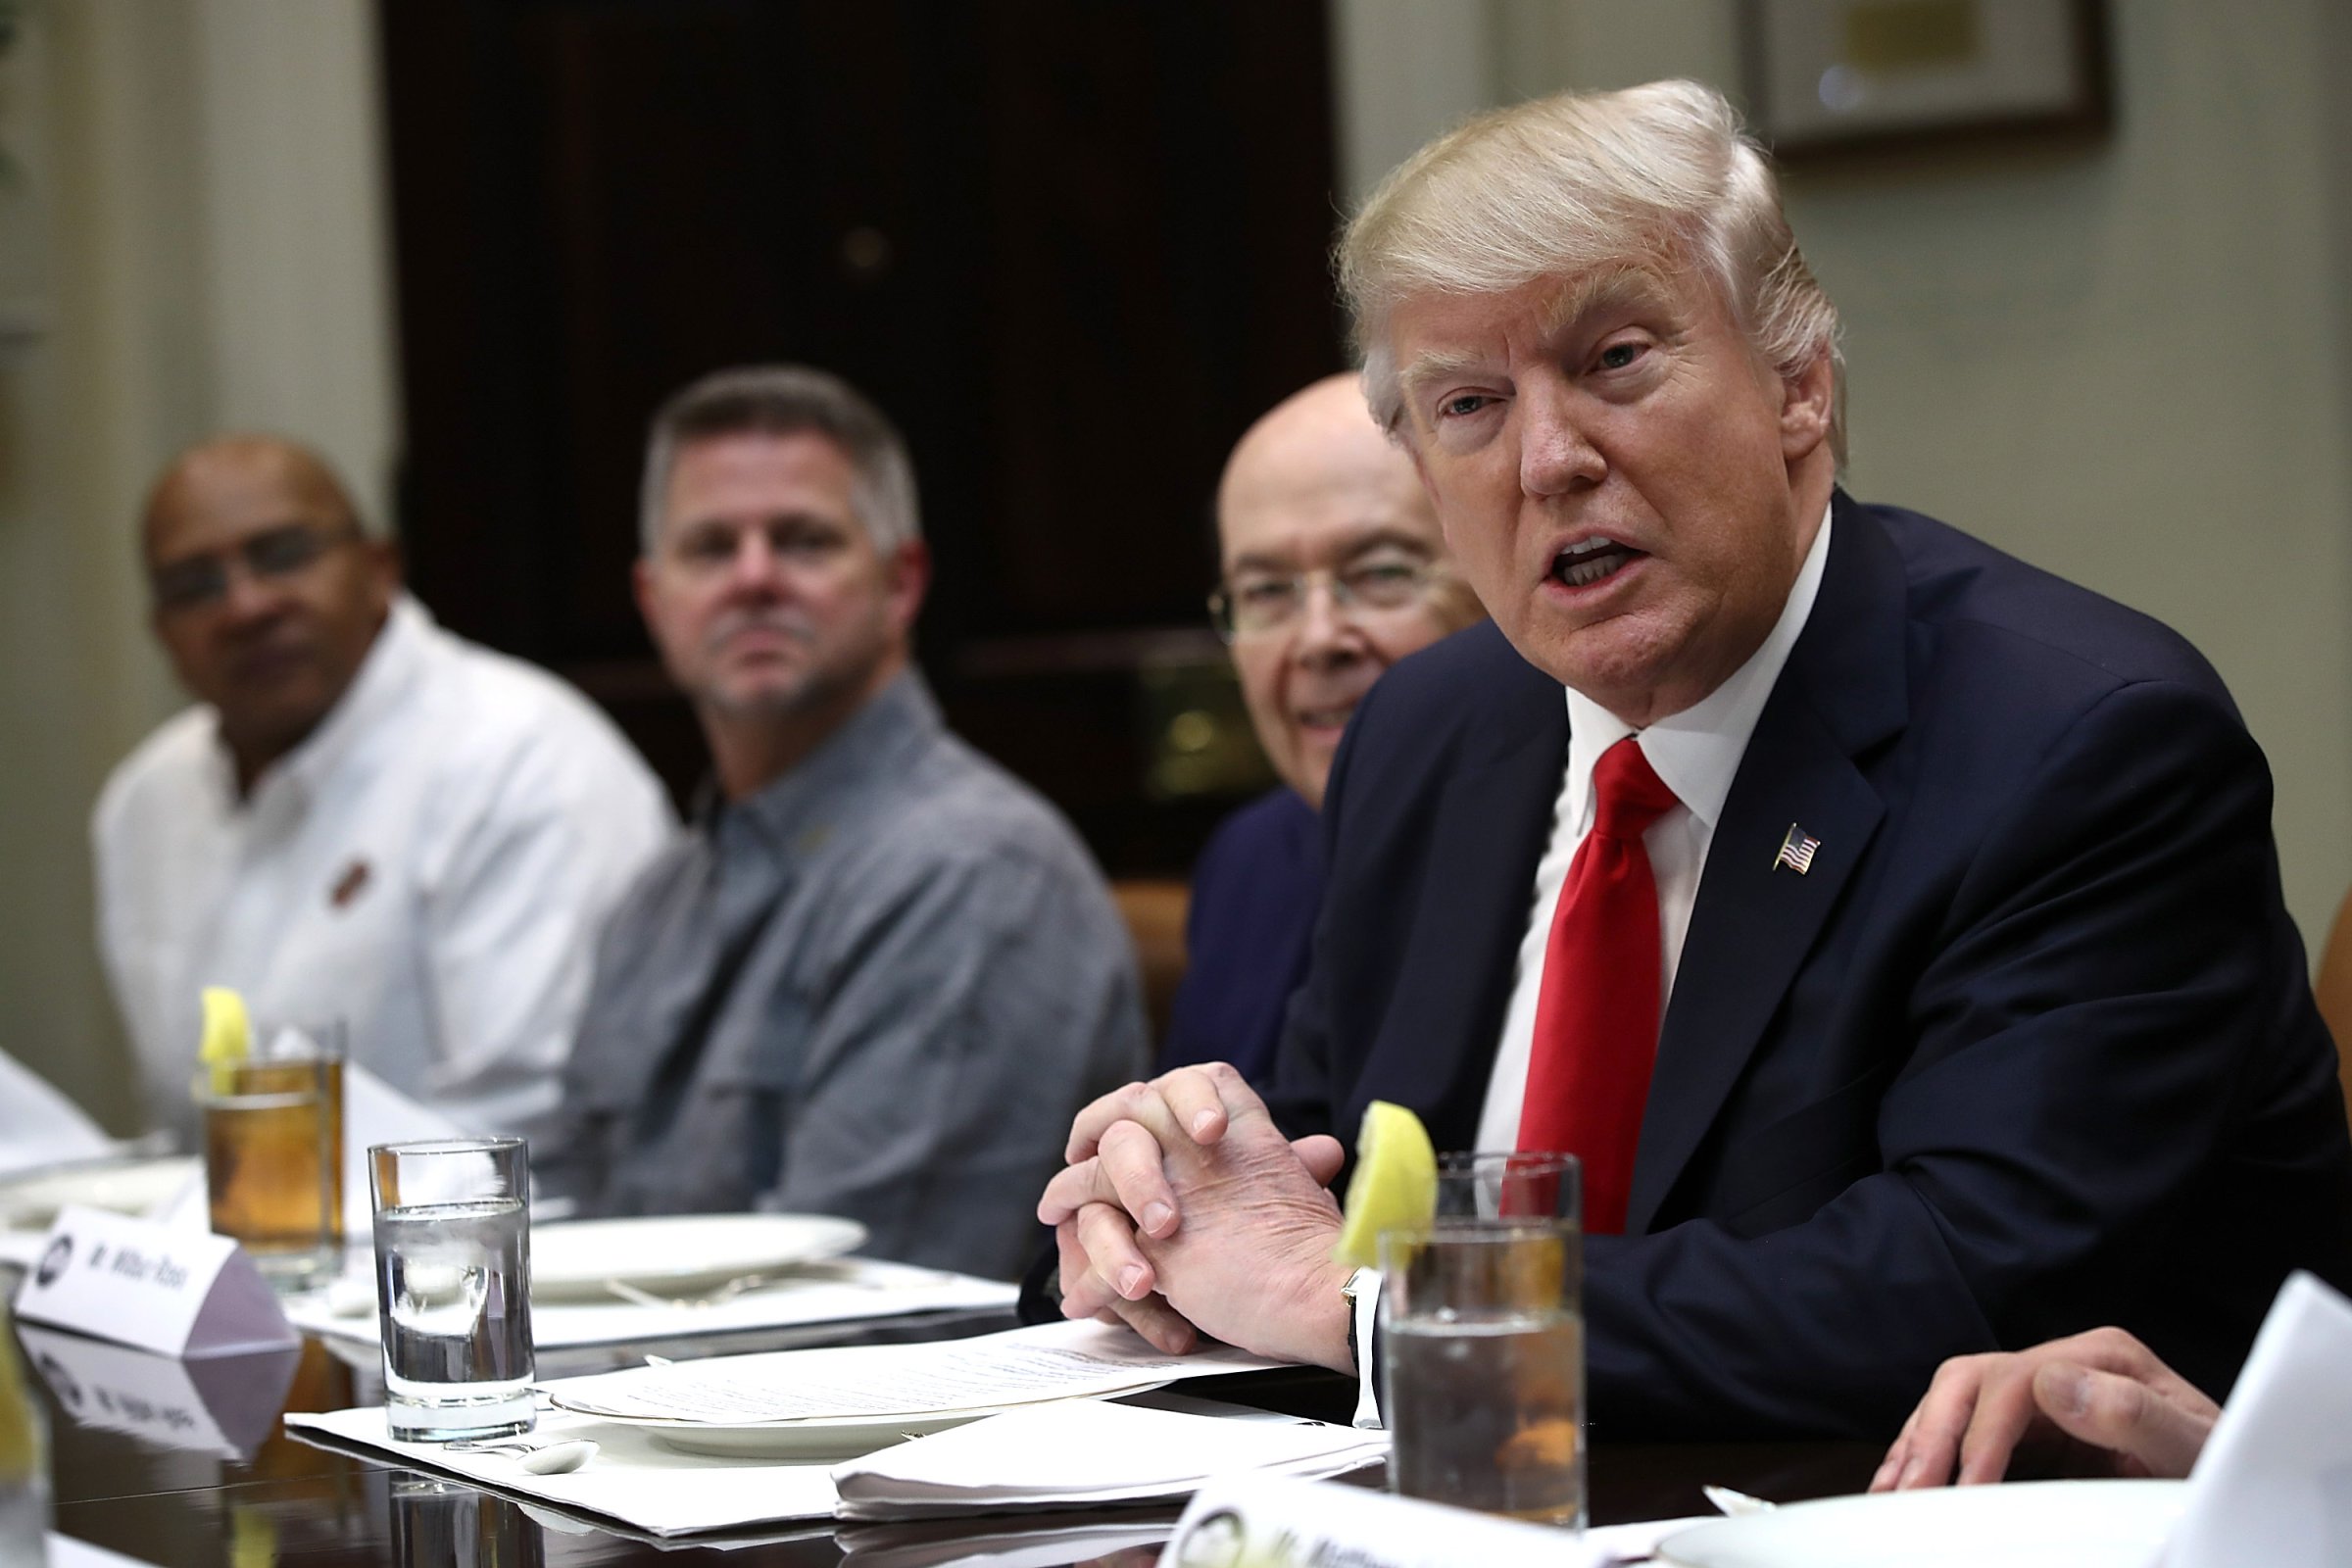 President Trump Has Lunch With Harley Davidson Executives And Union Reps